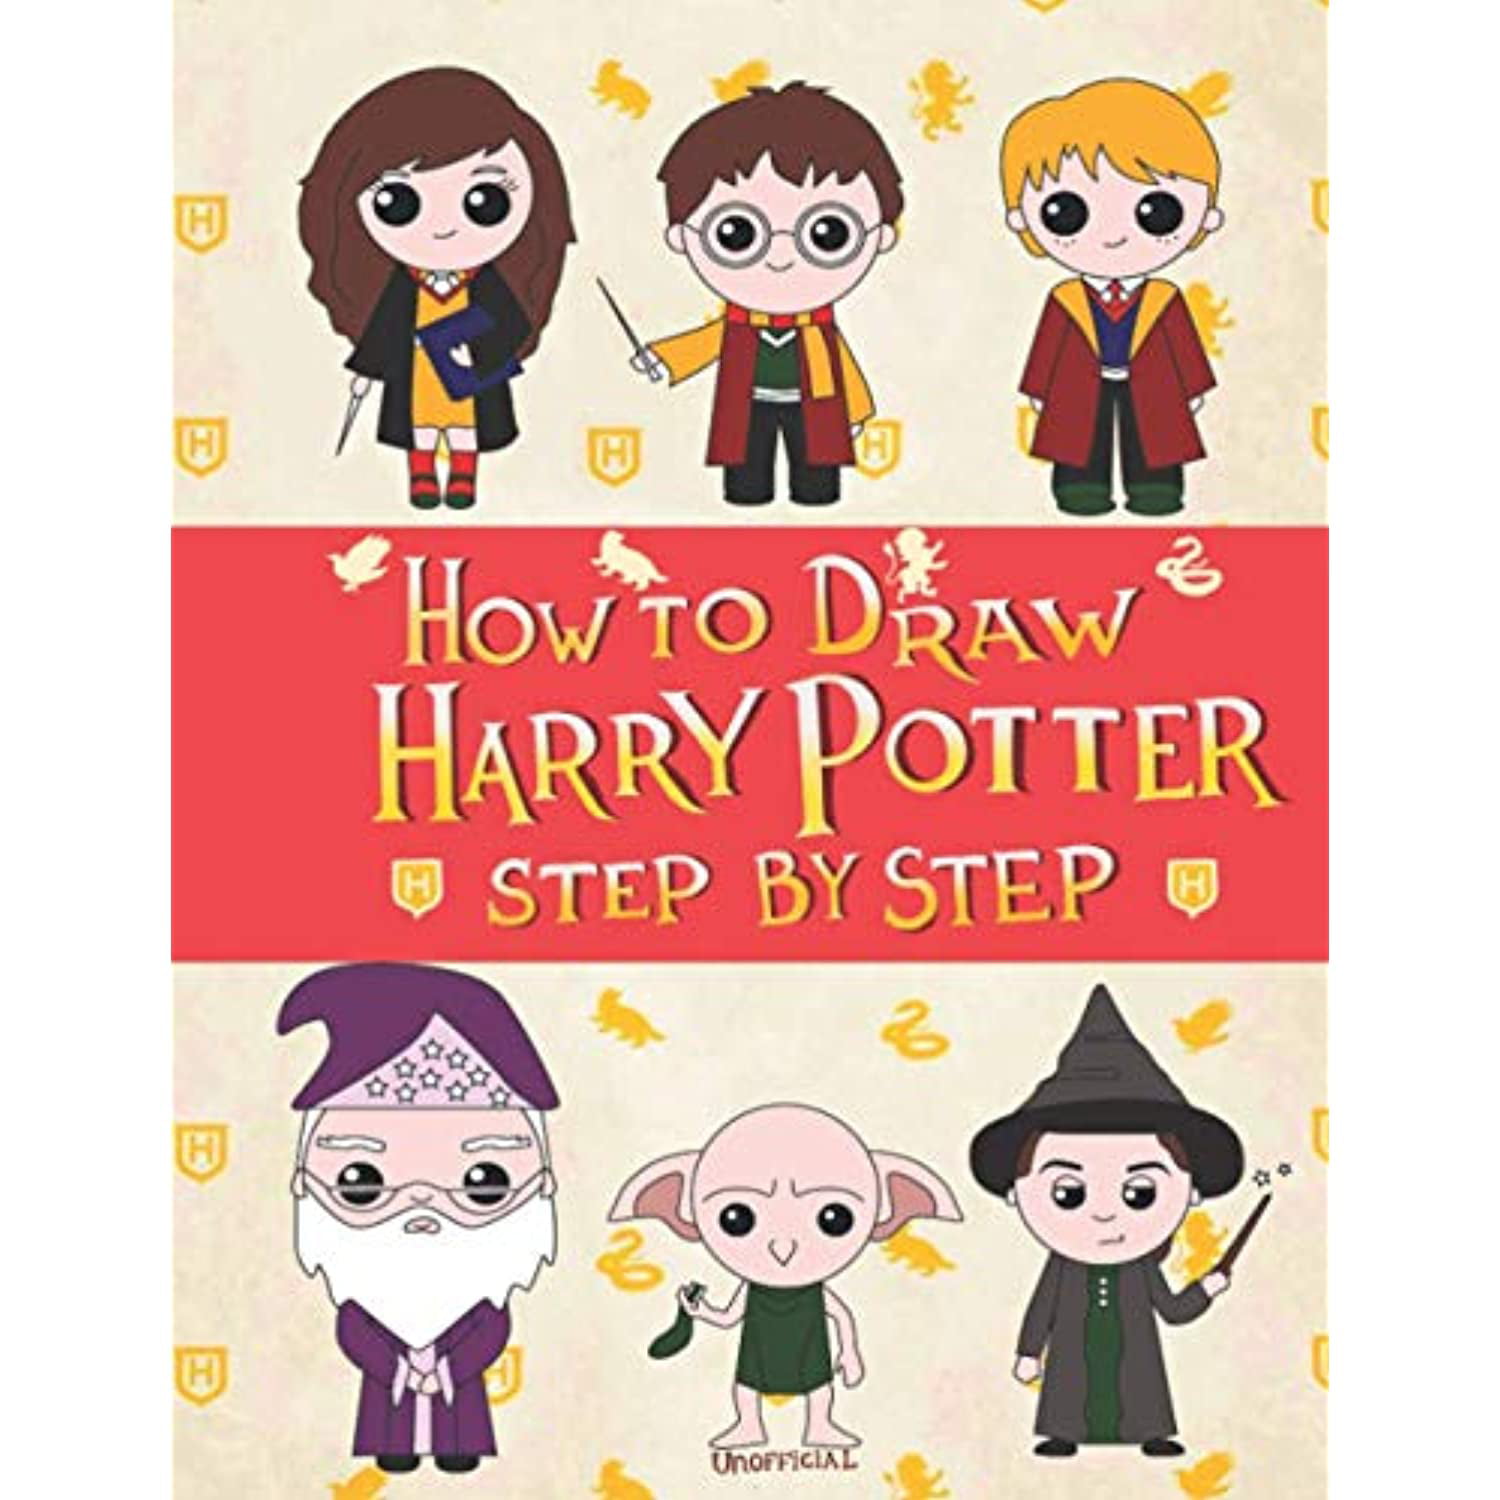 How To Draw Harry Potter: Harry Potter Drawing Book For Kids: Learn To Draw  All Your Favourite Harry Potter Characters | Walmart Canada